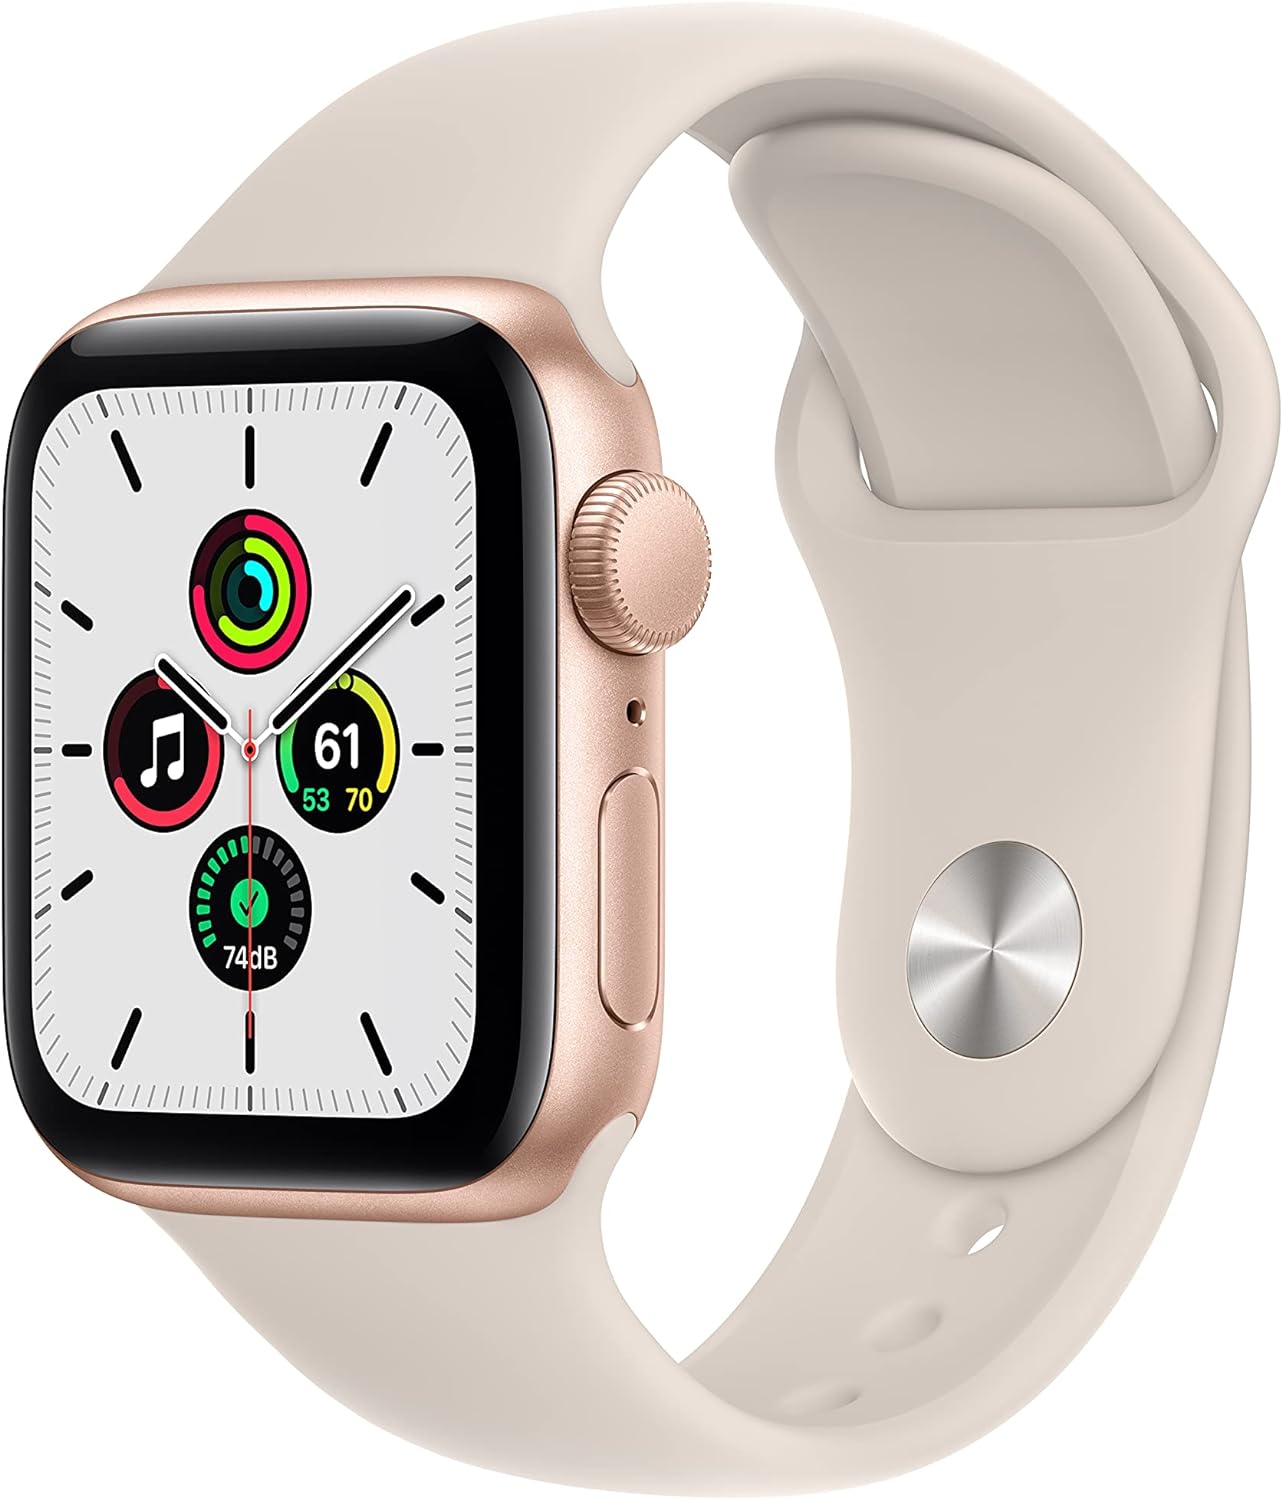 Apple Watch SE (Gen 1) Review: Stay Connected, Active, and Healthy